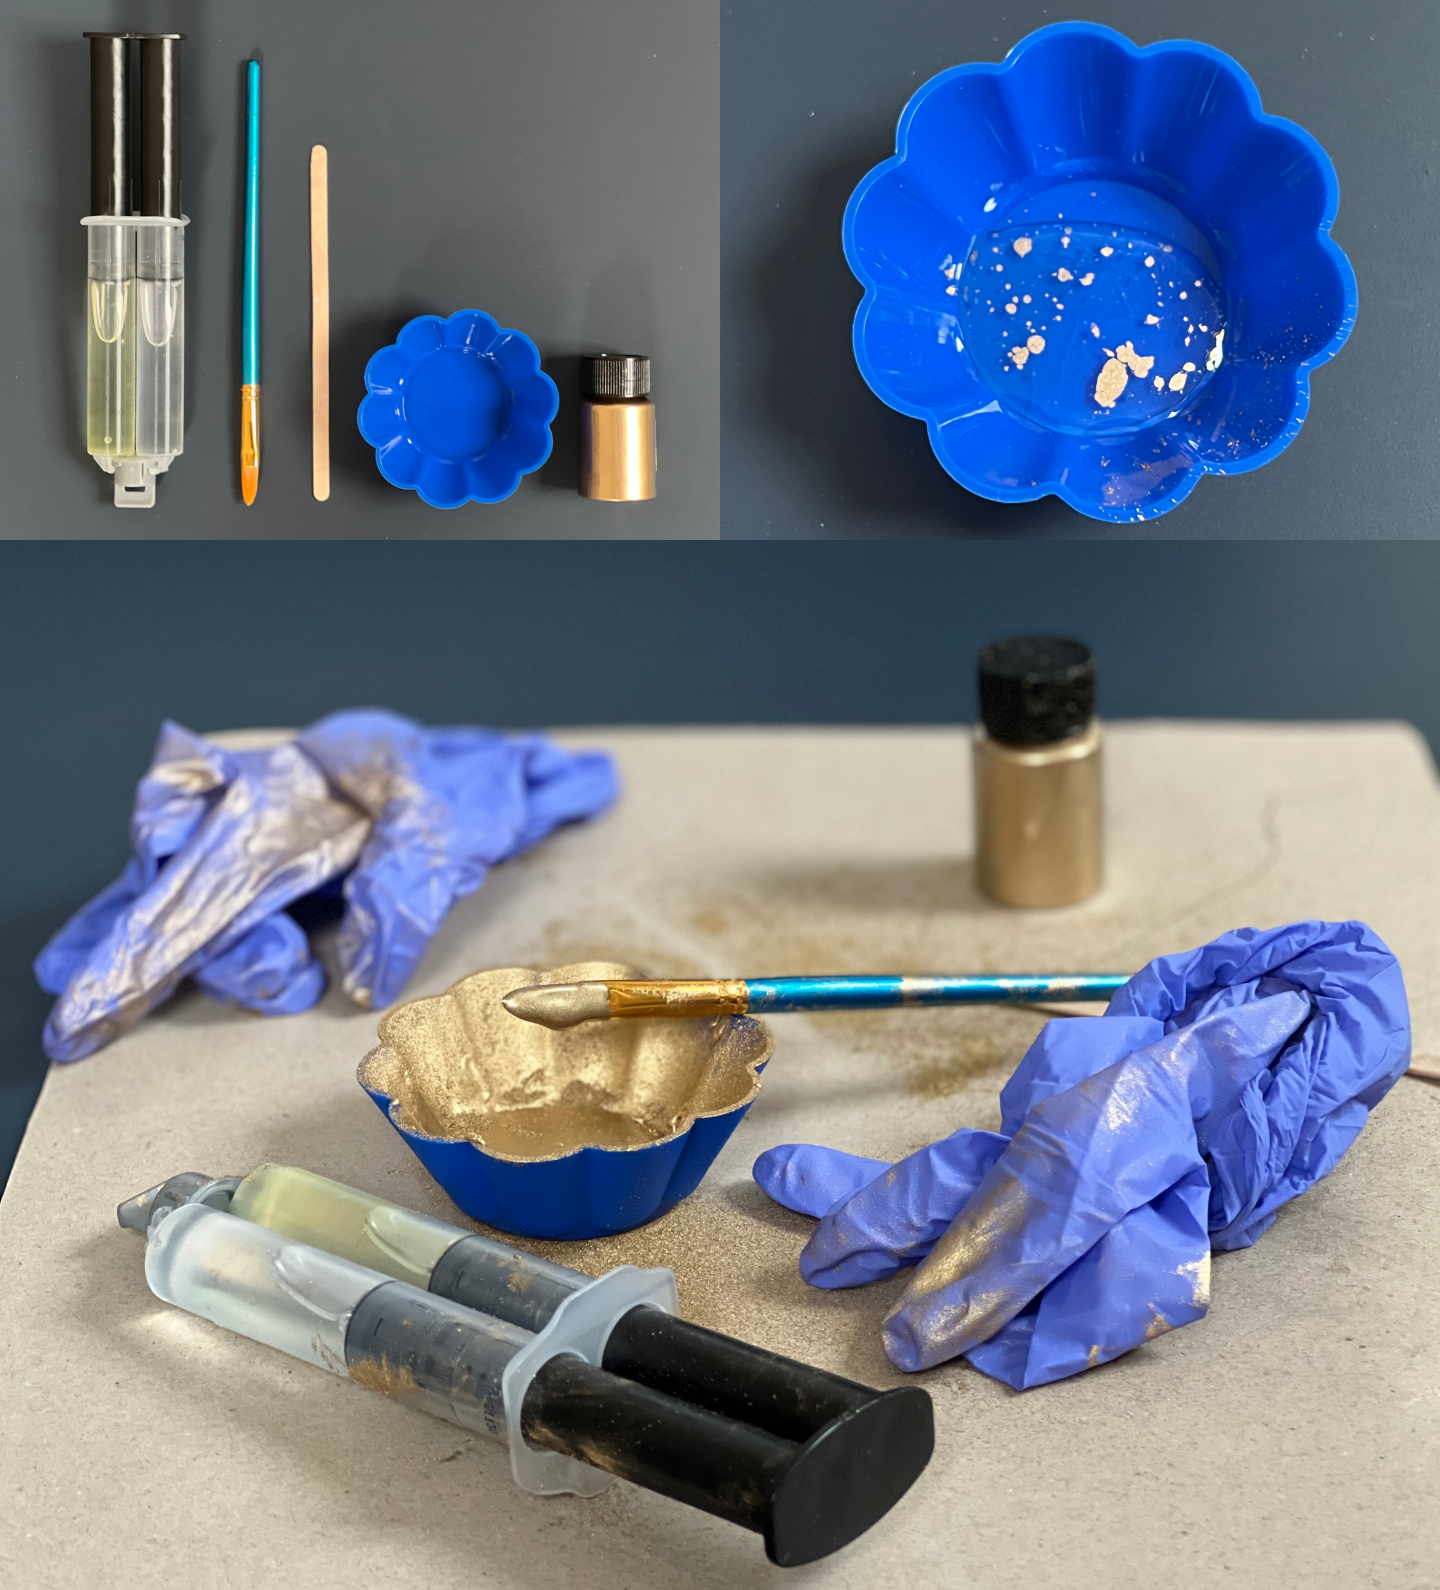 Clockwise: 1) Kintsugi materials, 2) blue silicon flower with epoxy resin and gold dust, 3) used materials with gold dust on them